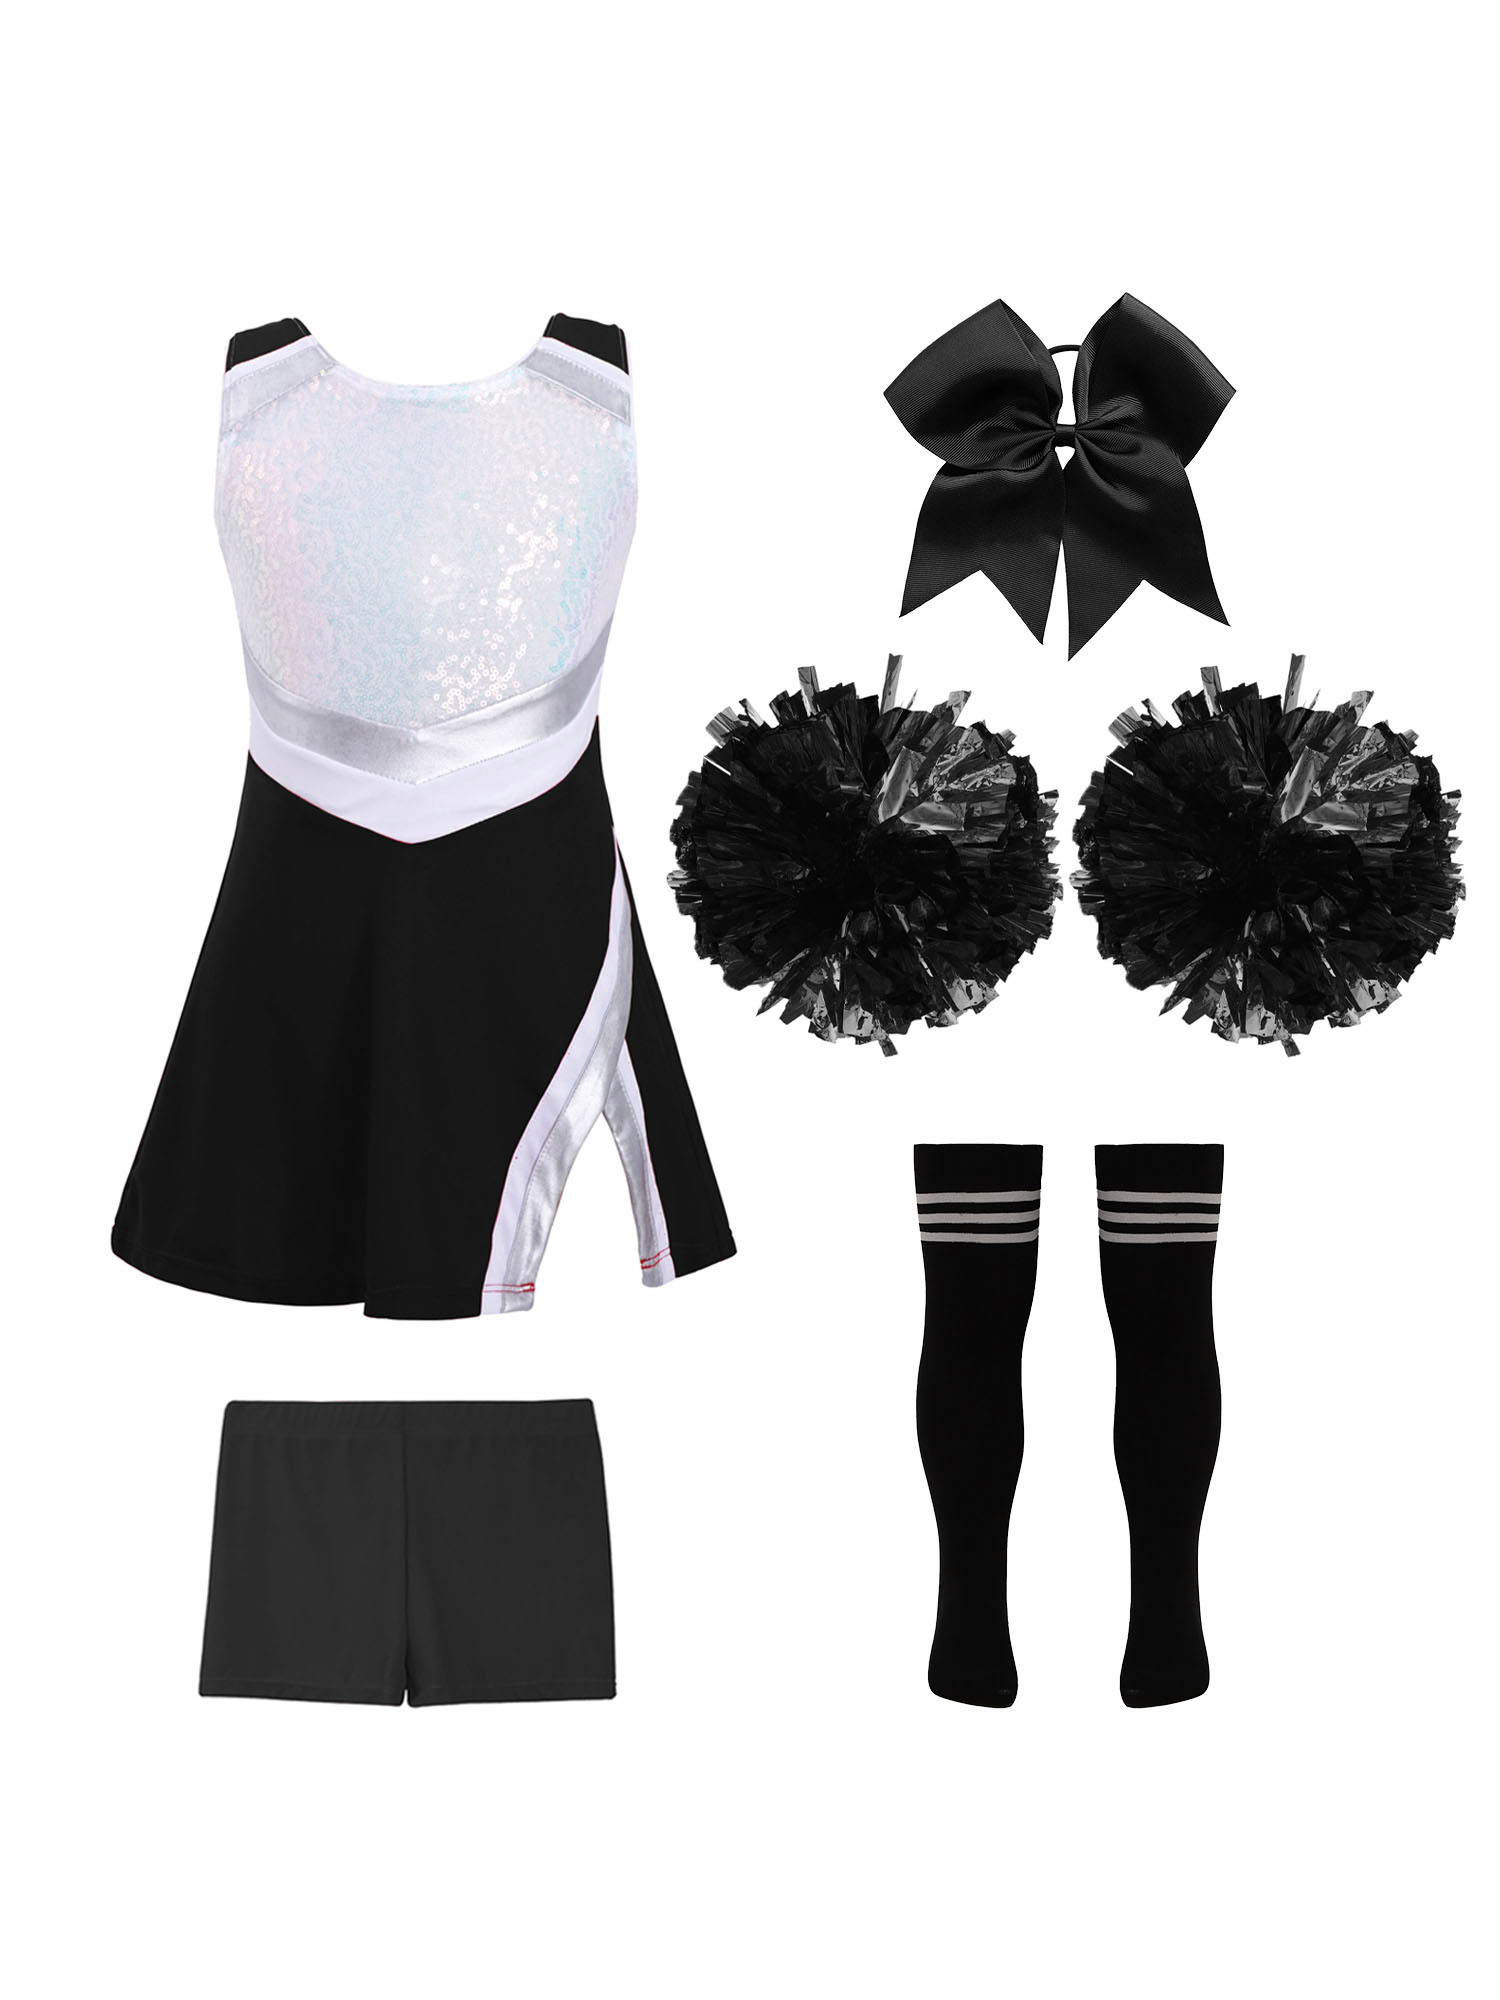 TiaoBug Kids Girls Cheer Leader Uniform Sports Games Cheerleading Dance Outfits Halloween Carnival Fancy Dress Up A Black&White 14 - image 1 of 5